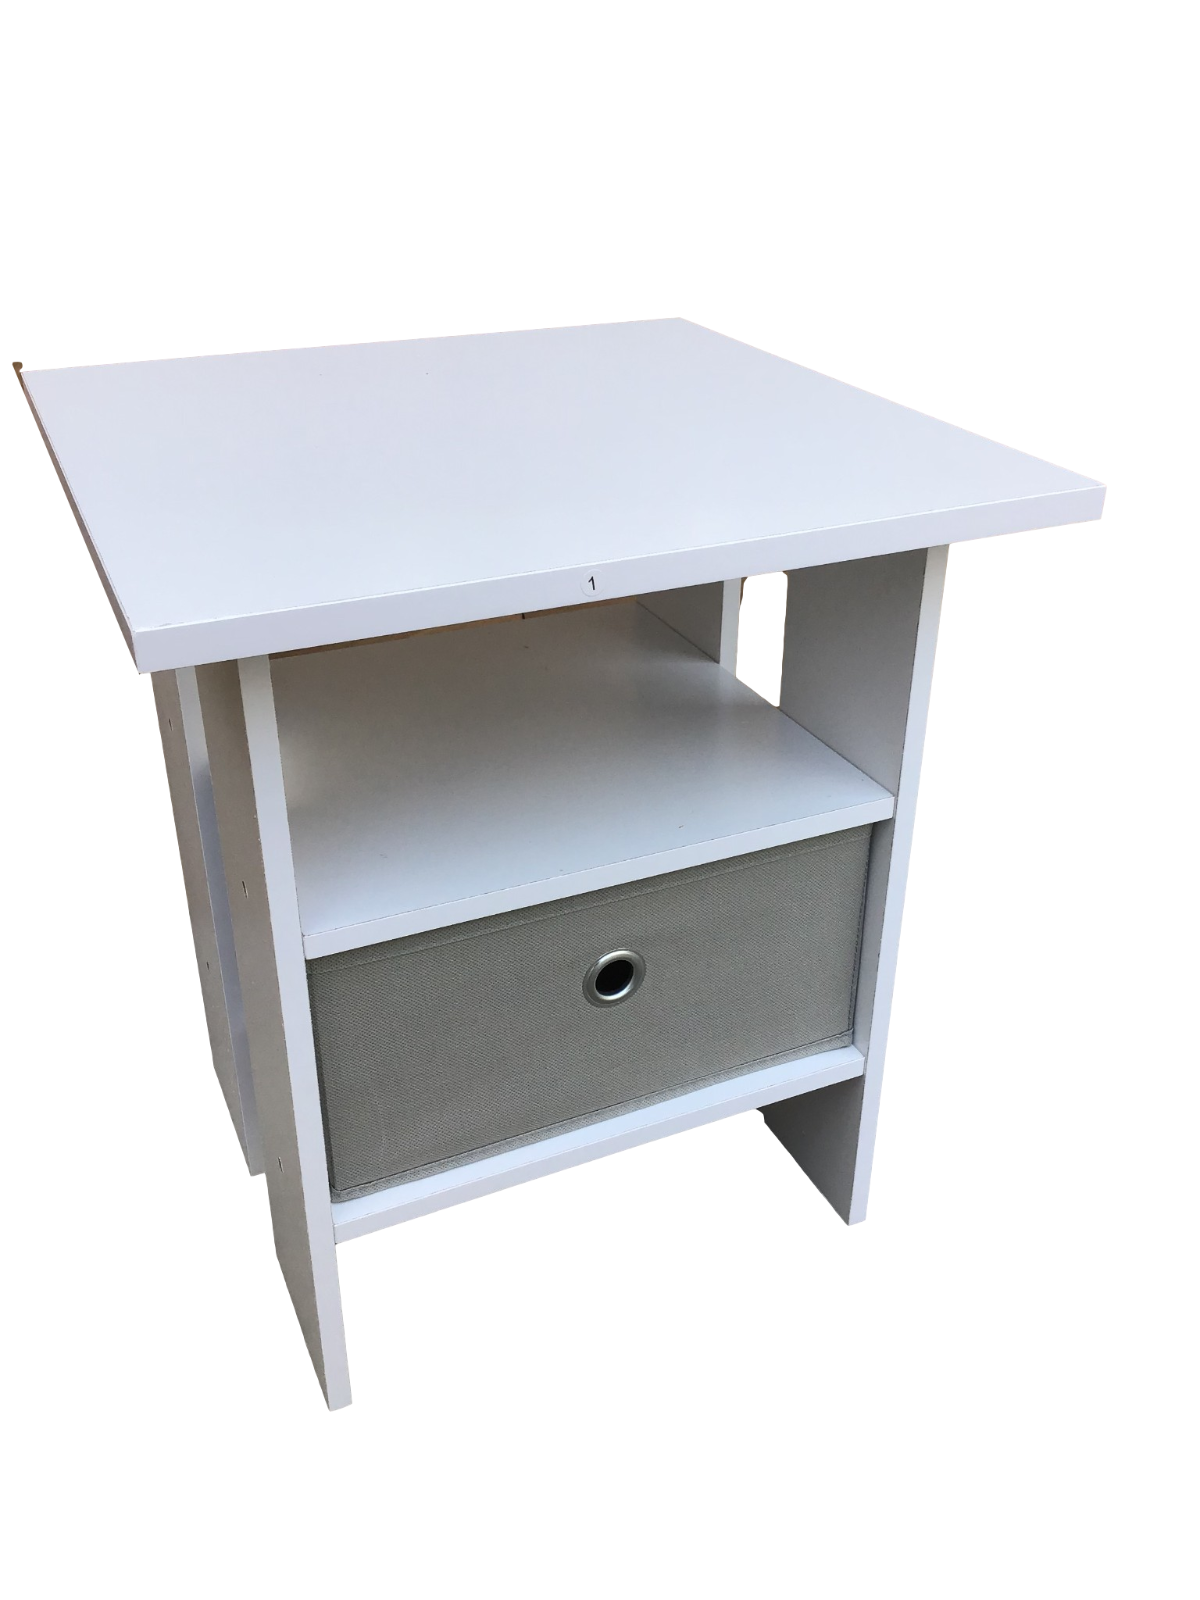 2x Modern White Bedside Tables Nightt Stand For Bedroom With Canvas Drawer Shelf